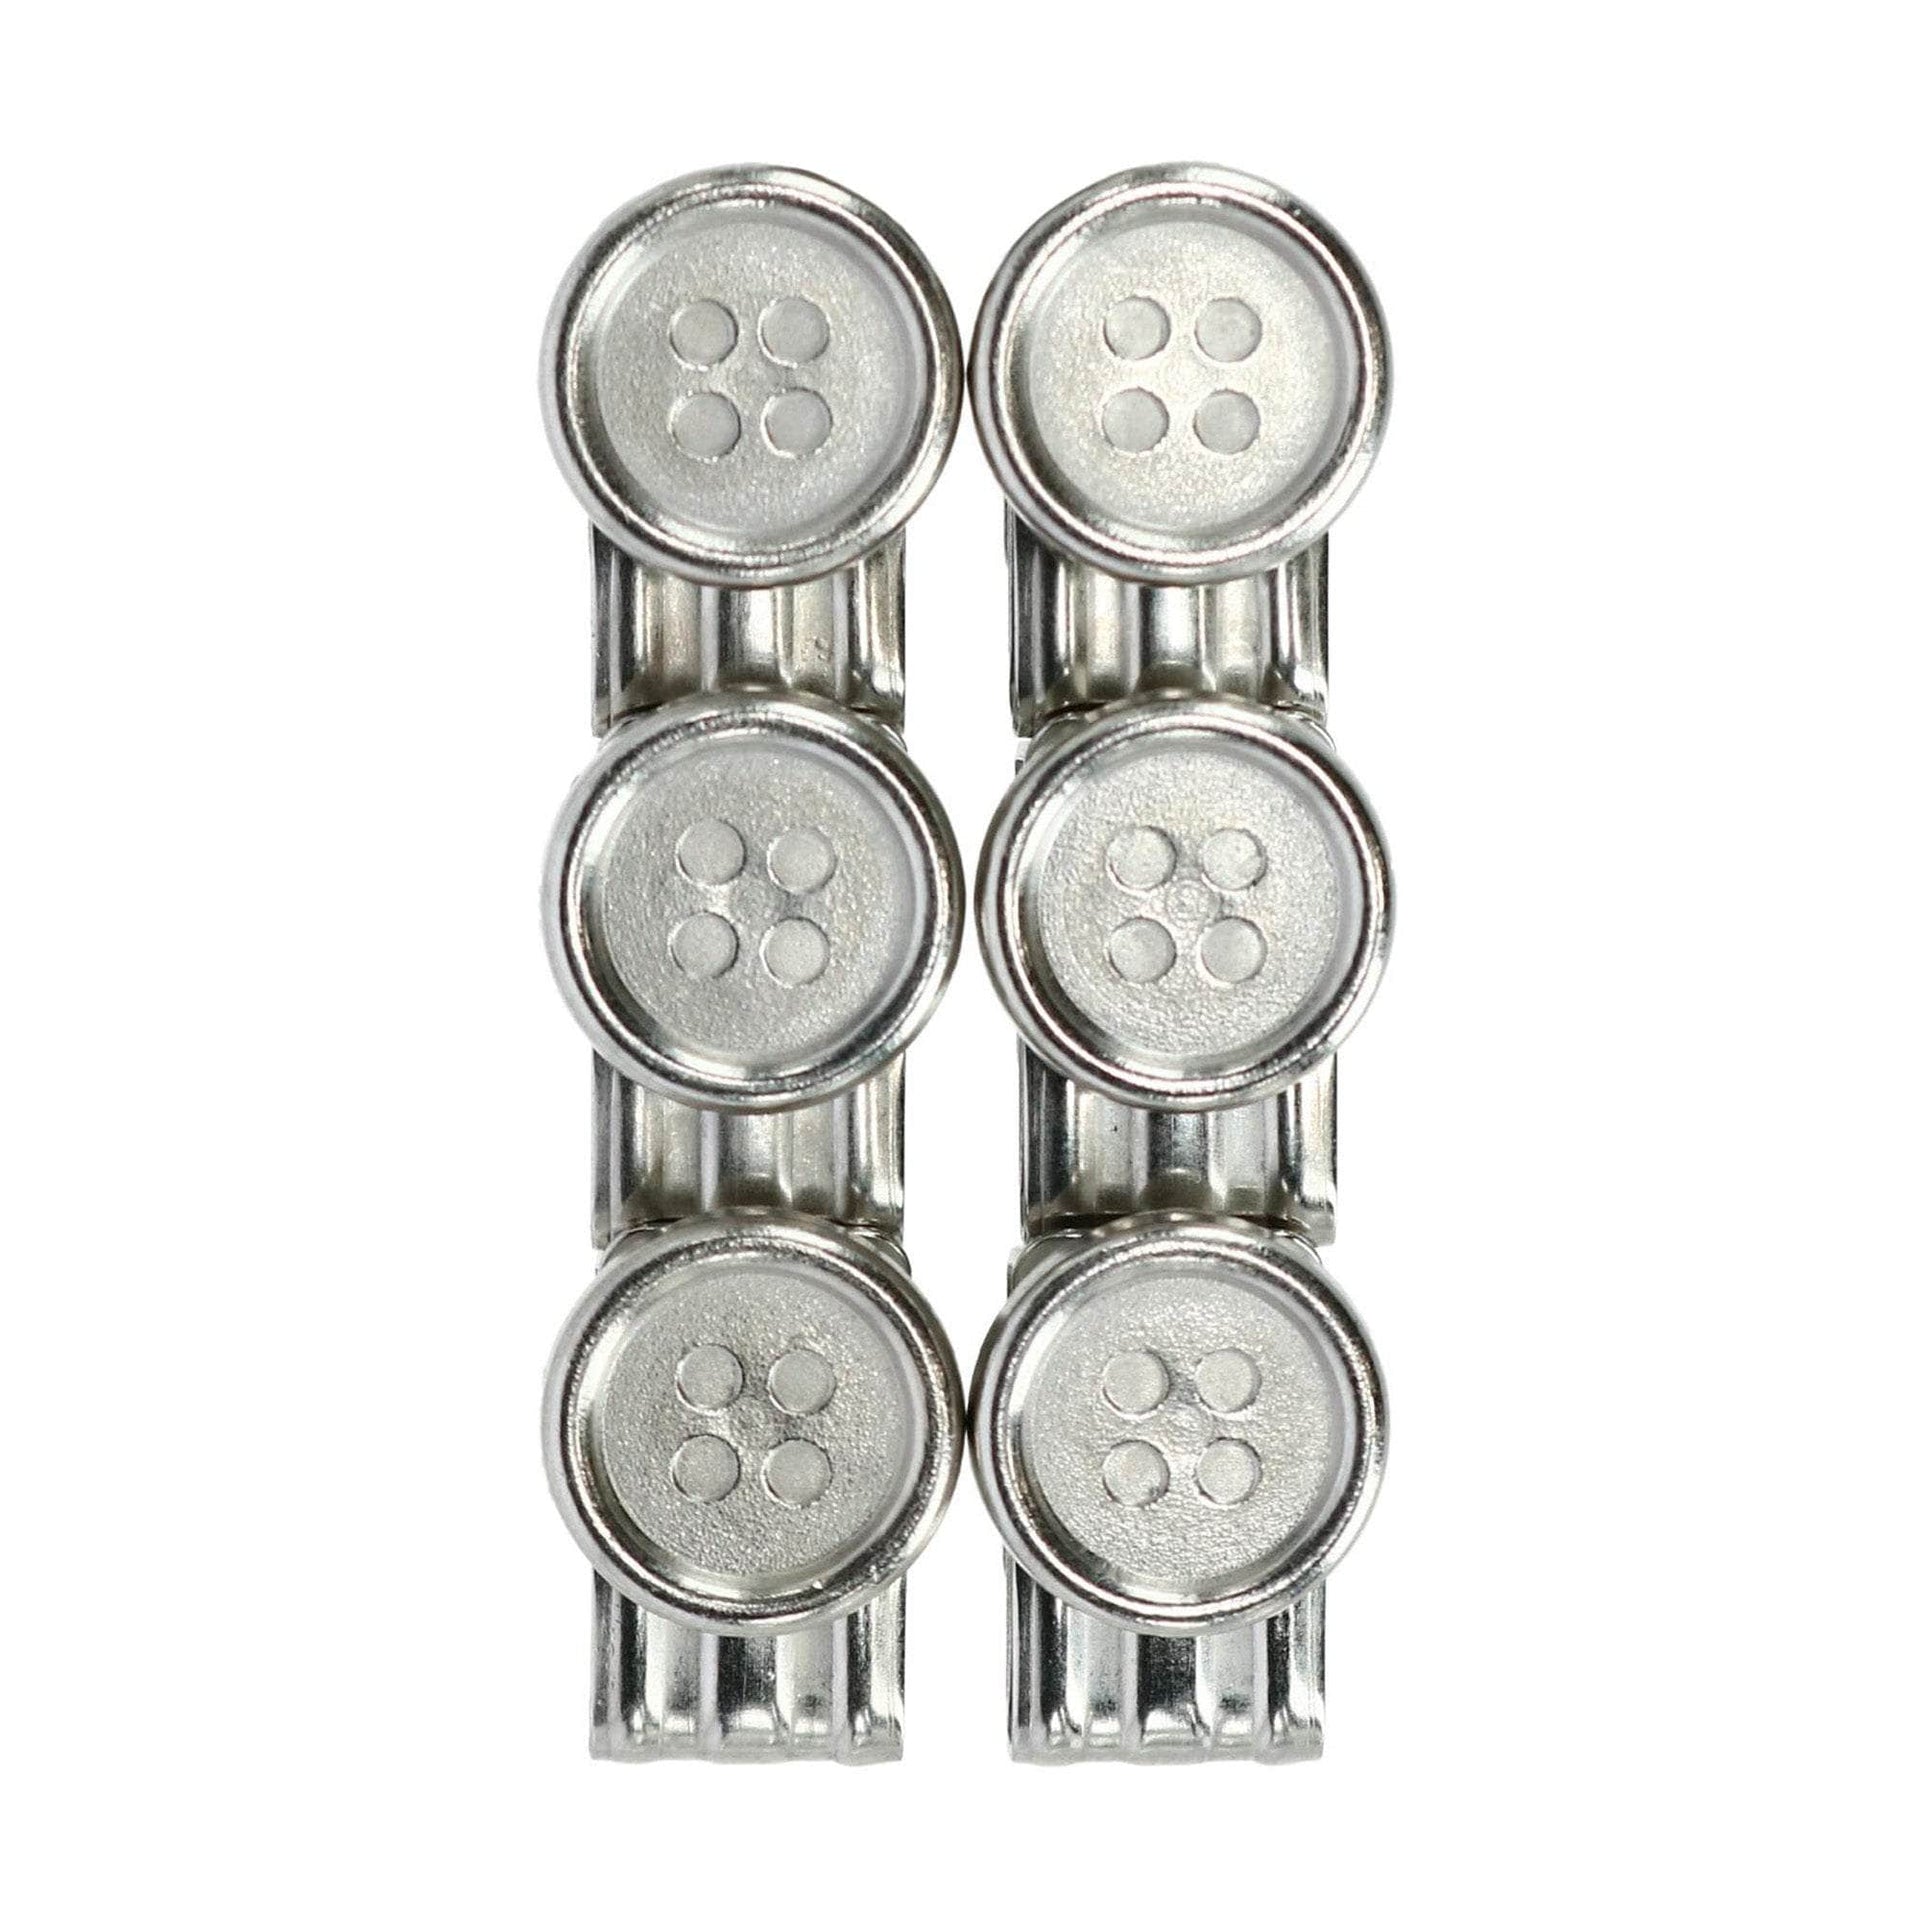 Brucle Button Clips for Suspenders